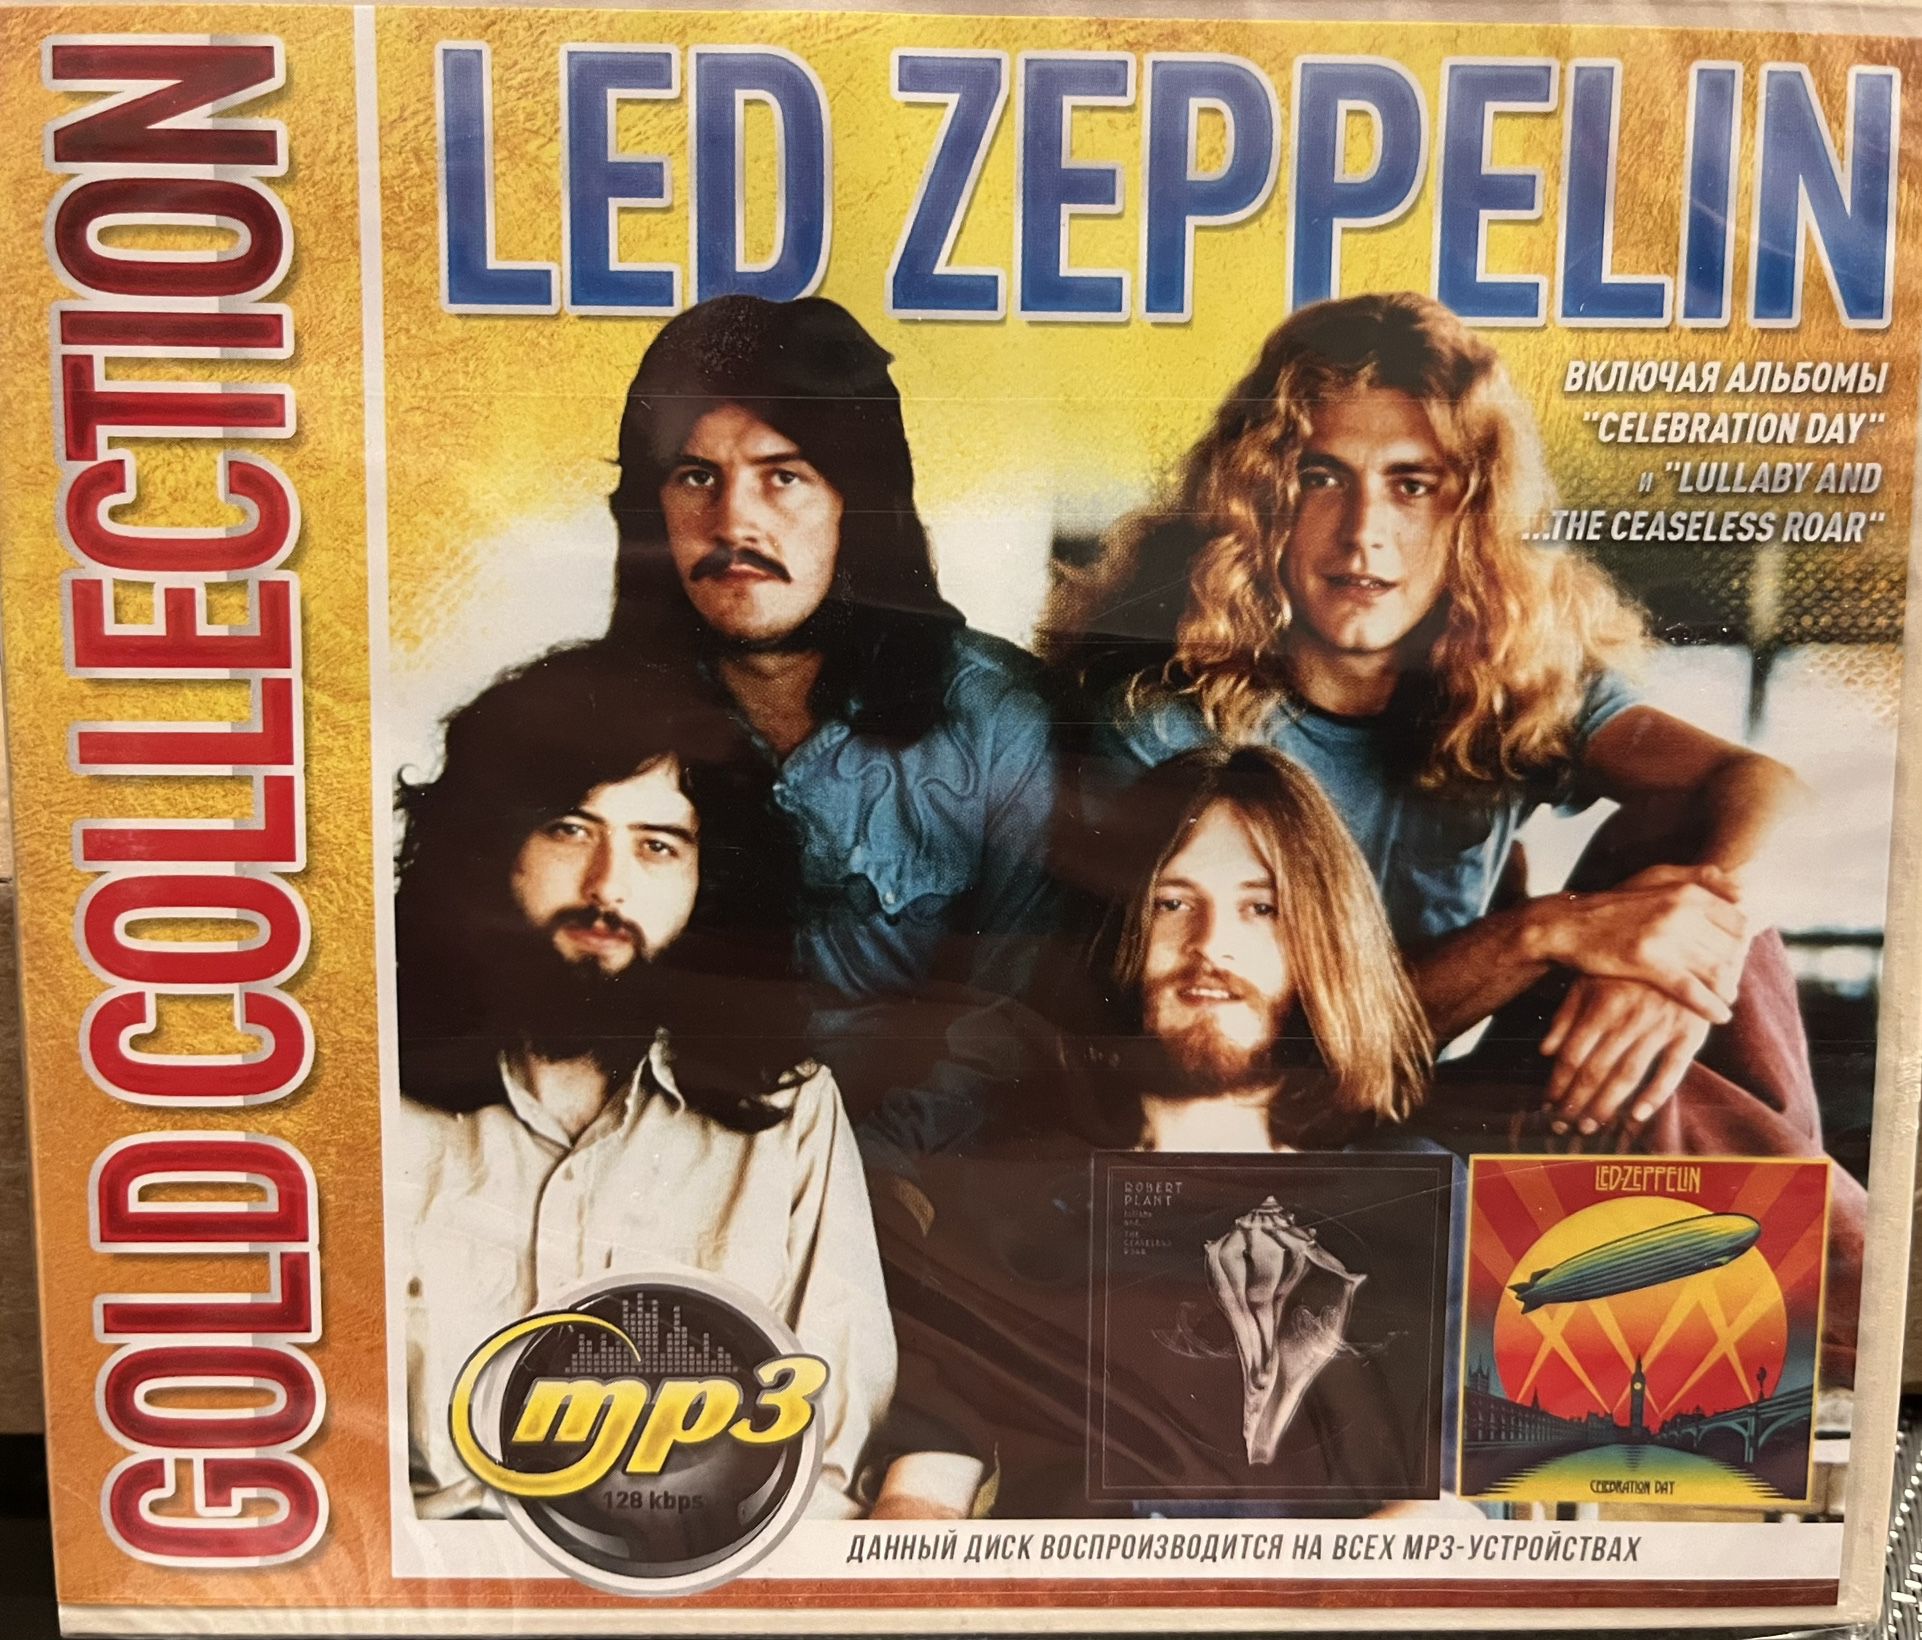 MP3 Led Zeppelin - Best Collection 14 MP3 Albums